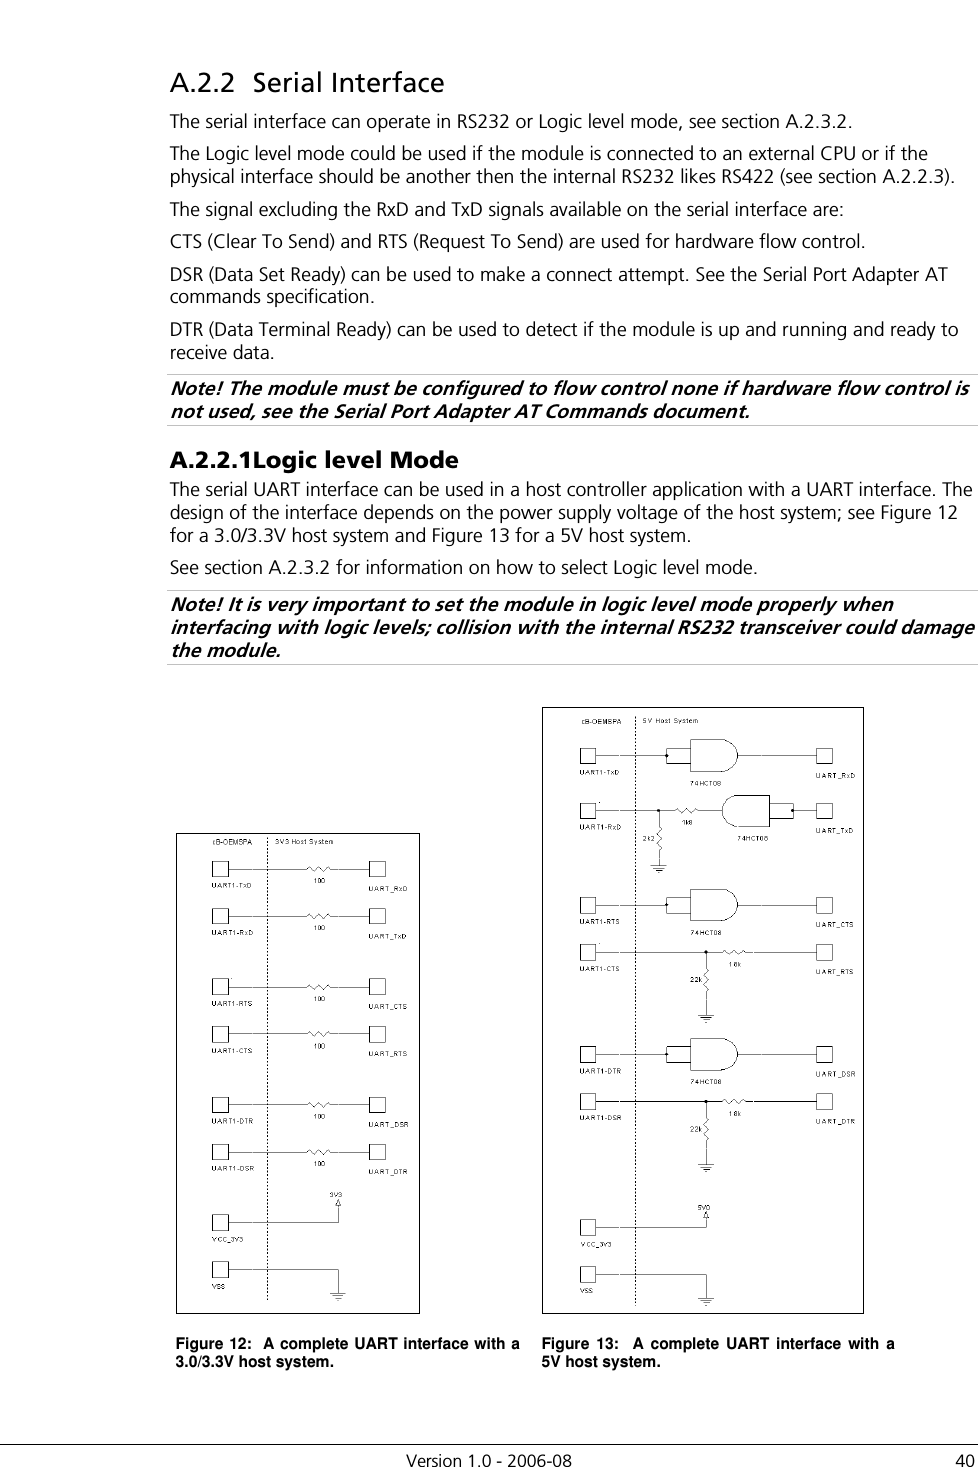          Version 1.0 - 2006-08  40 A.2.2  Serial Interface The serial interface can operate in RS232 or Logic level mode, see section A.2.3.2. The Logic level mode could be used if the module is connected to an external CPU or if the physical interface should be another then the internal RS232 likes RS422 (see section A.2.2.3). The signal excluding the RxD and TxD signals available on the serial interface are: CTS (Clear To Send) and RTS (Request To Send) are used for hardware flow control. DSR (Data Set Ready) can be used to make a connect attempt. See the Serial Port Adapter AT commands specification. DTR (Data Terminal Ready) can be used to detect if the module is up and running and ready to receive data. Note! The module must be configured to flow control none if hardware flow control is not used, see the Serial Port Adapter AT Commands document. A.2.2.1 Logic level Mode The serial UART interface can be used in a host controller application with a UART interface. The design of the interface depends on the power supply voltage of the host system; see Figure 12 for a 3.0/3.3V host system and Figure 13 for a 5V host system.  See section A.2.3.2 for information on how to select Logic level mode. Note! It is very important to set the module in logic level mode properly when interfacing with logic levels; collision with the internal RS232 transceiver could damage the module.    Figure 12:  A complete UART interface with a 3.0/3.3V host system.  Figure  13:    A  complete  UART  interface  with  a 5V host system.  